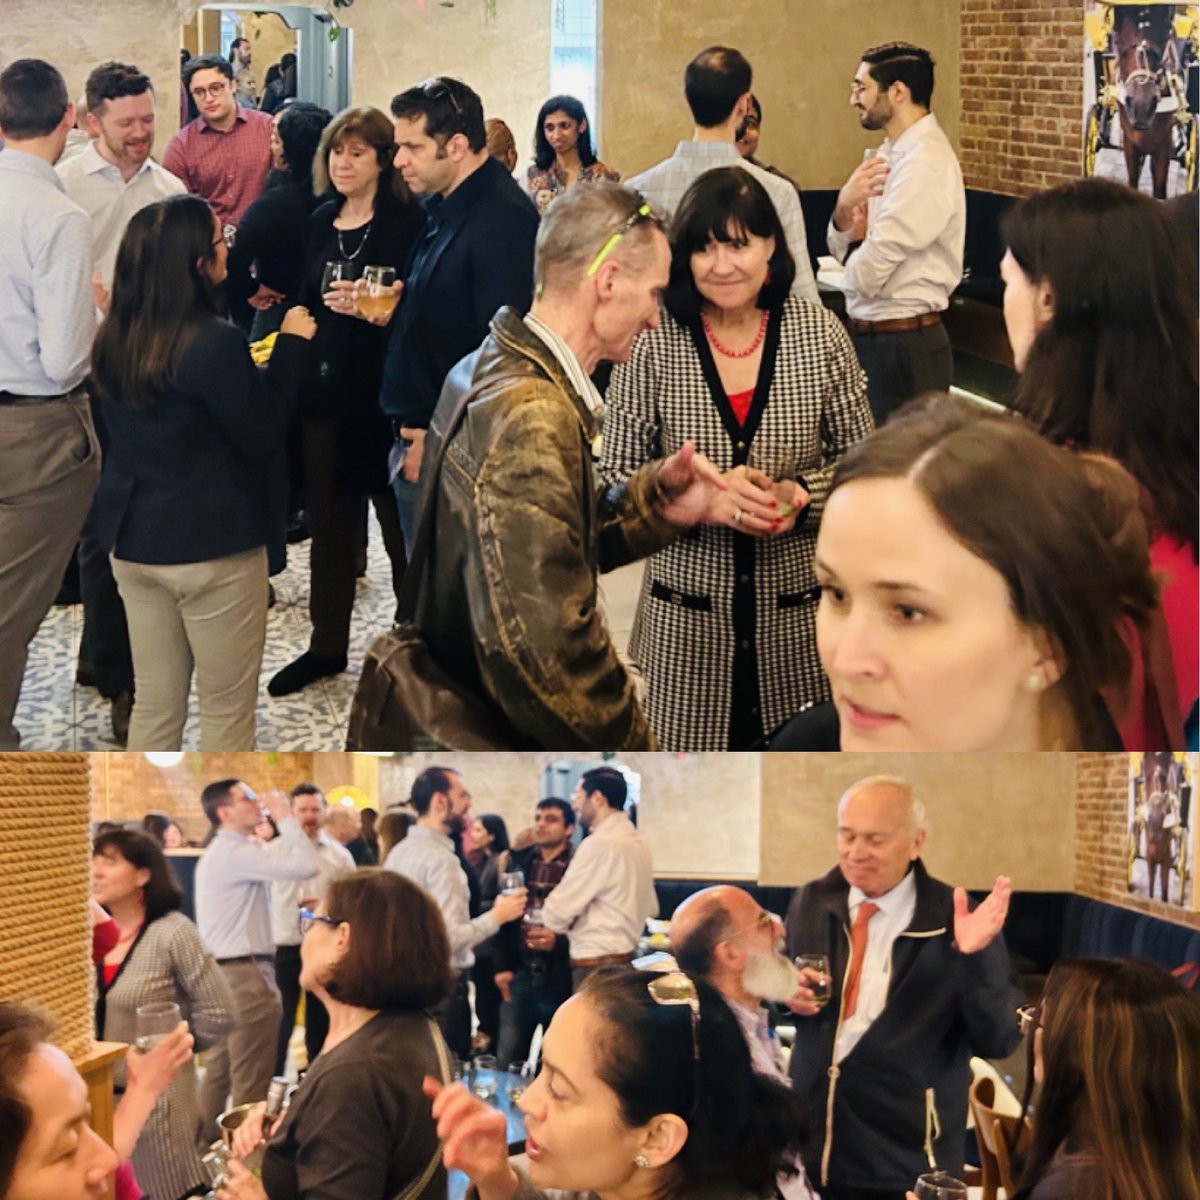 @DOMSinaiNYC’s monthly event, FACE (Faculty Assembling for Collaboration and Engagement), where faculty mingle with colleagues, the chair, and vice chairs, has been a game-changer! Building community, one connection at a time. #AcademicMedicine #MedTwitter